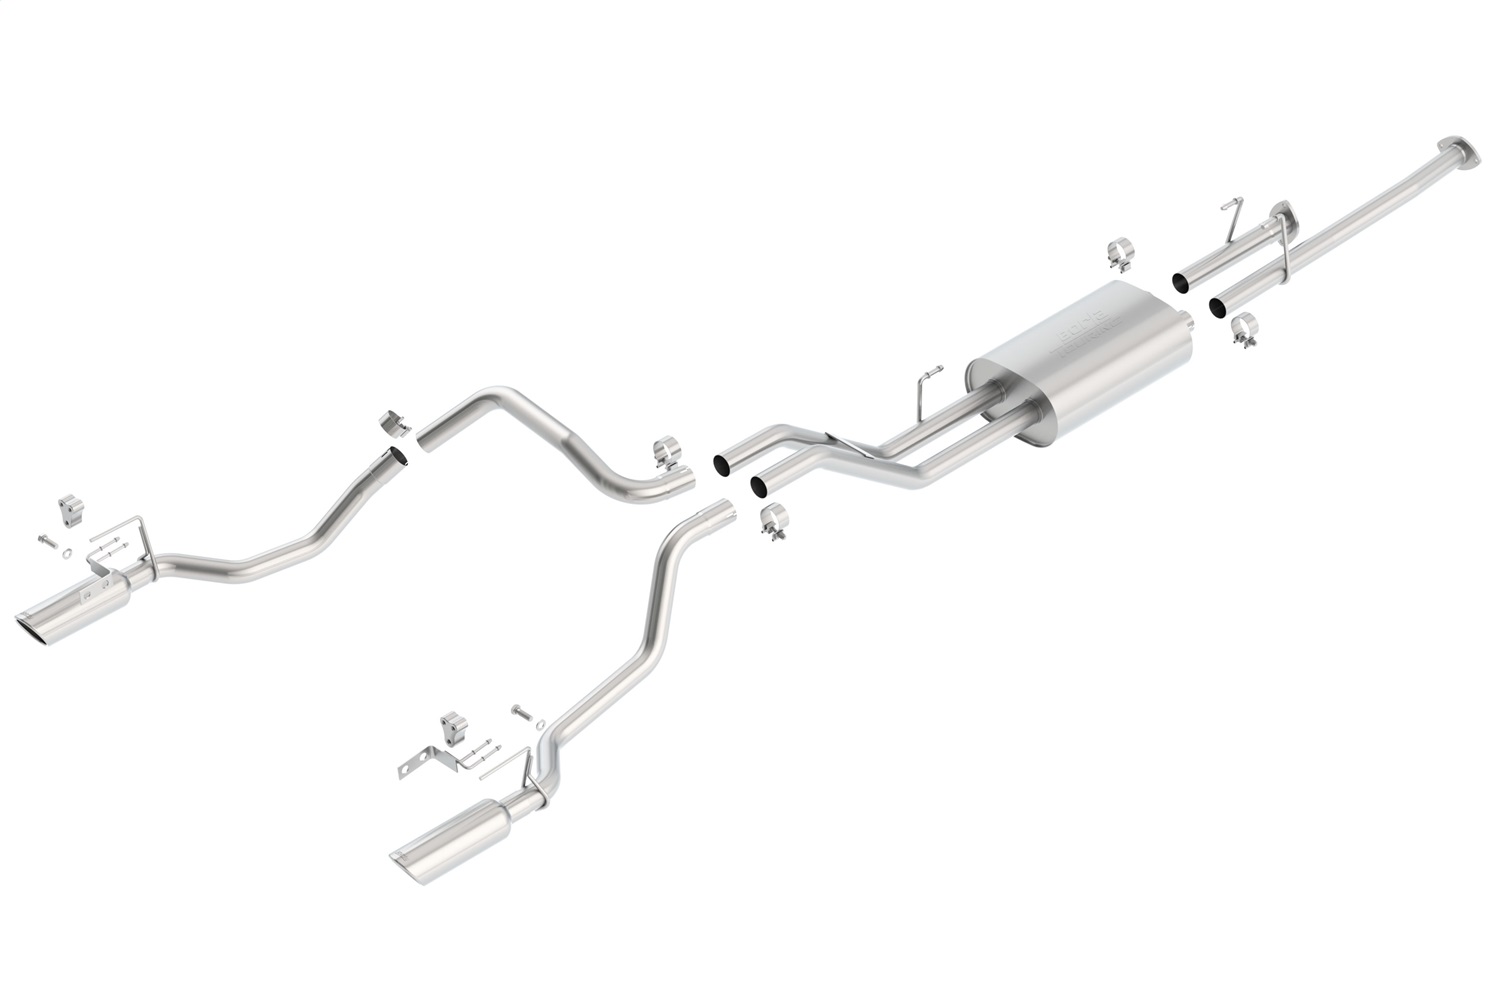 Borla 140333 Touring Cat-Back Exhaust System Fits 09-13 Tundra